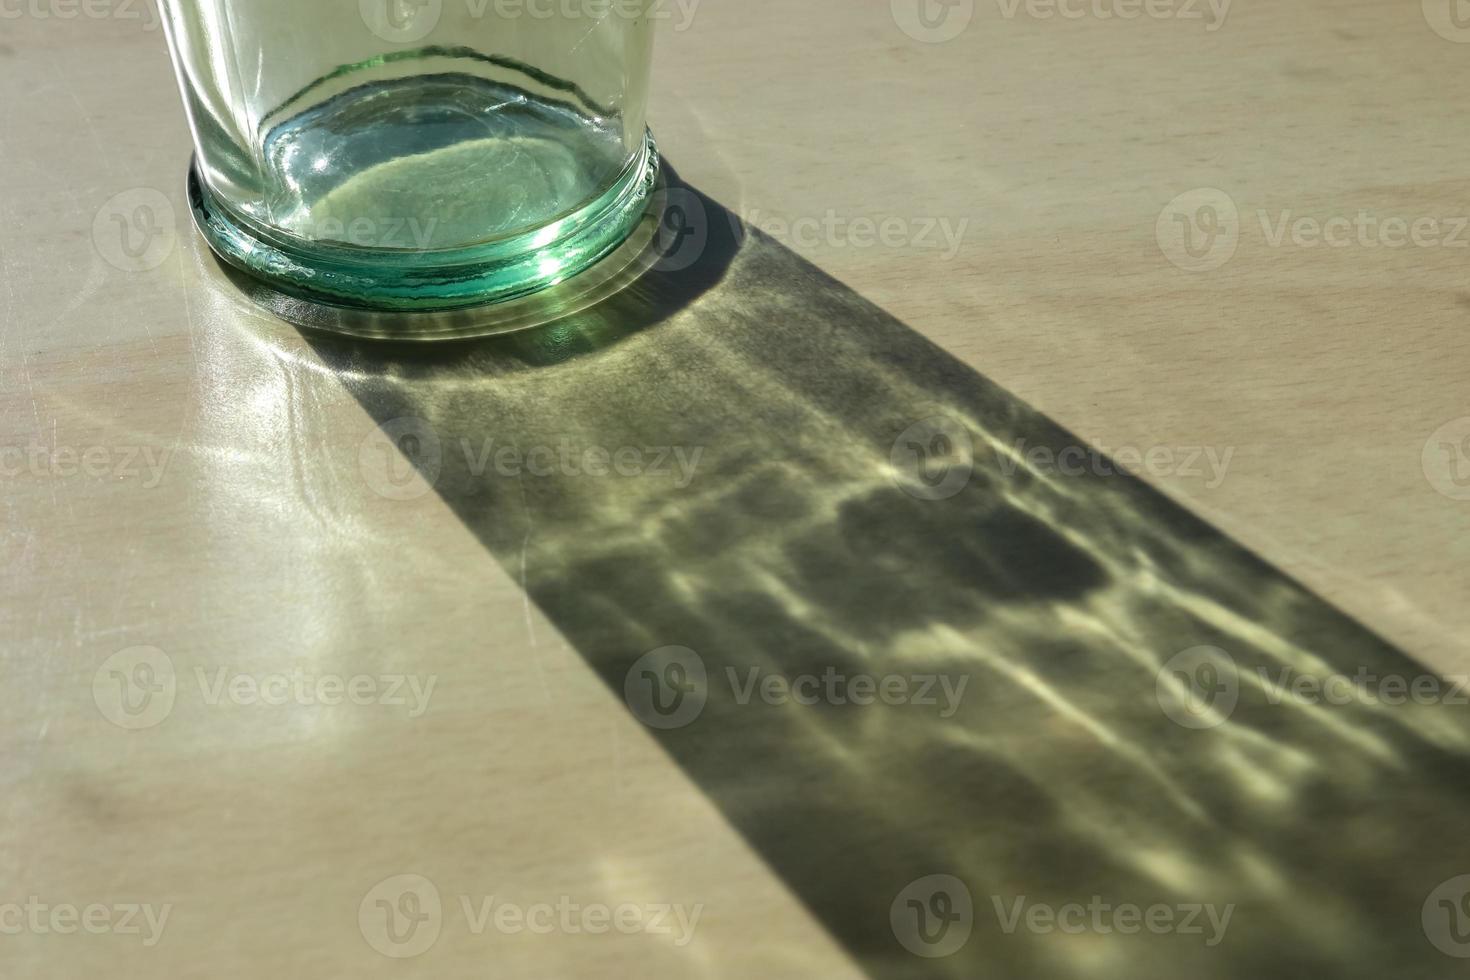 Sunlight shining through a drinking glas showing caustic light effects. photo